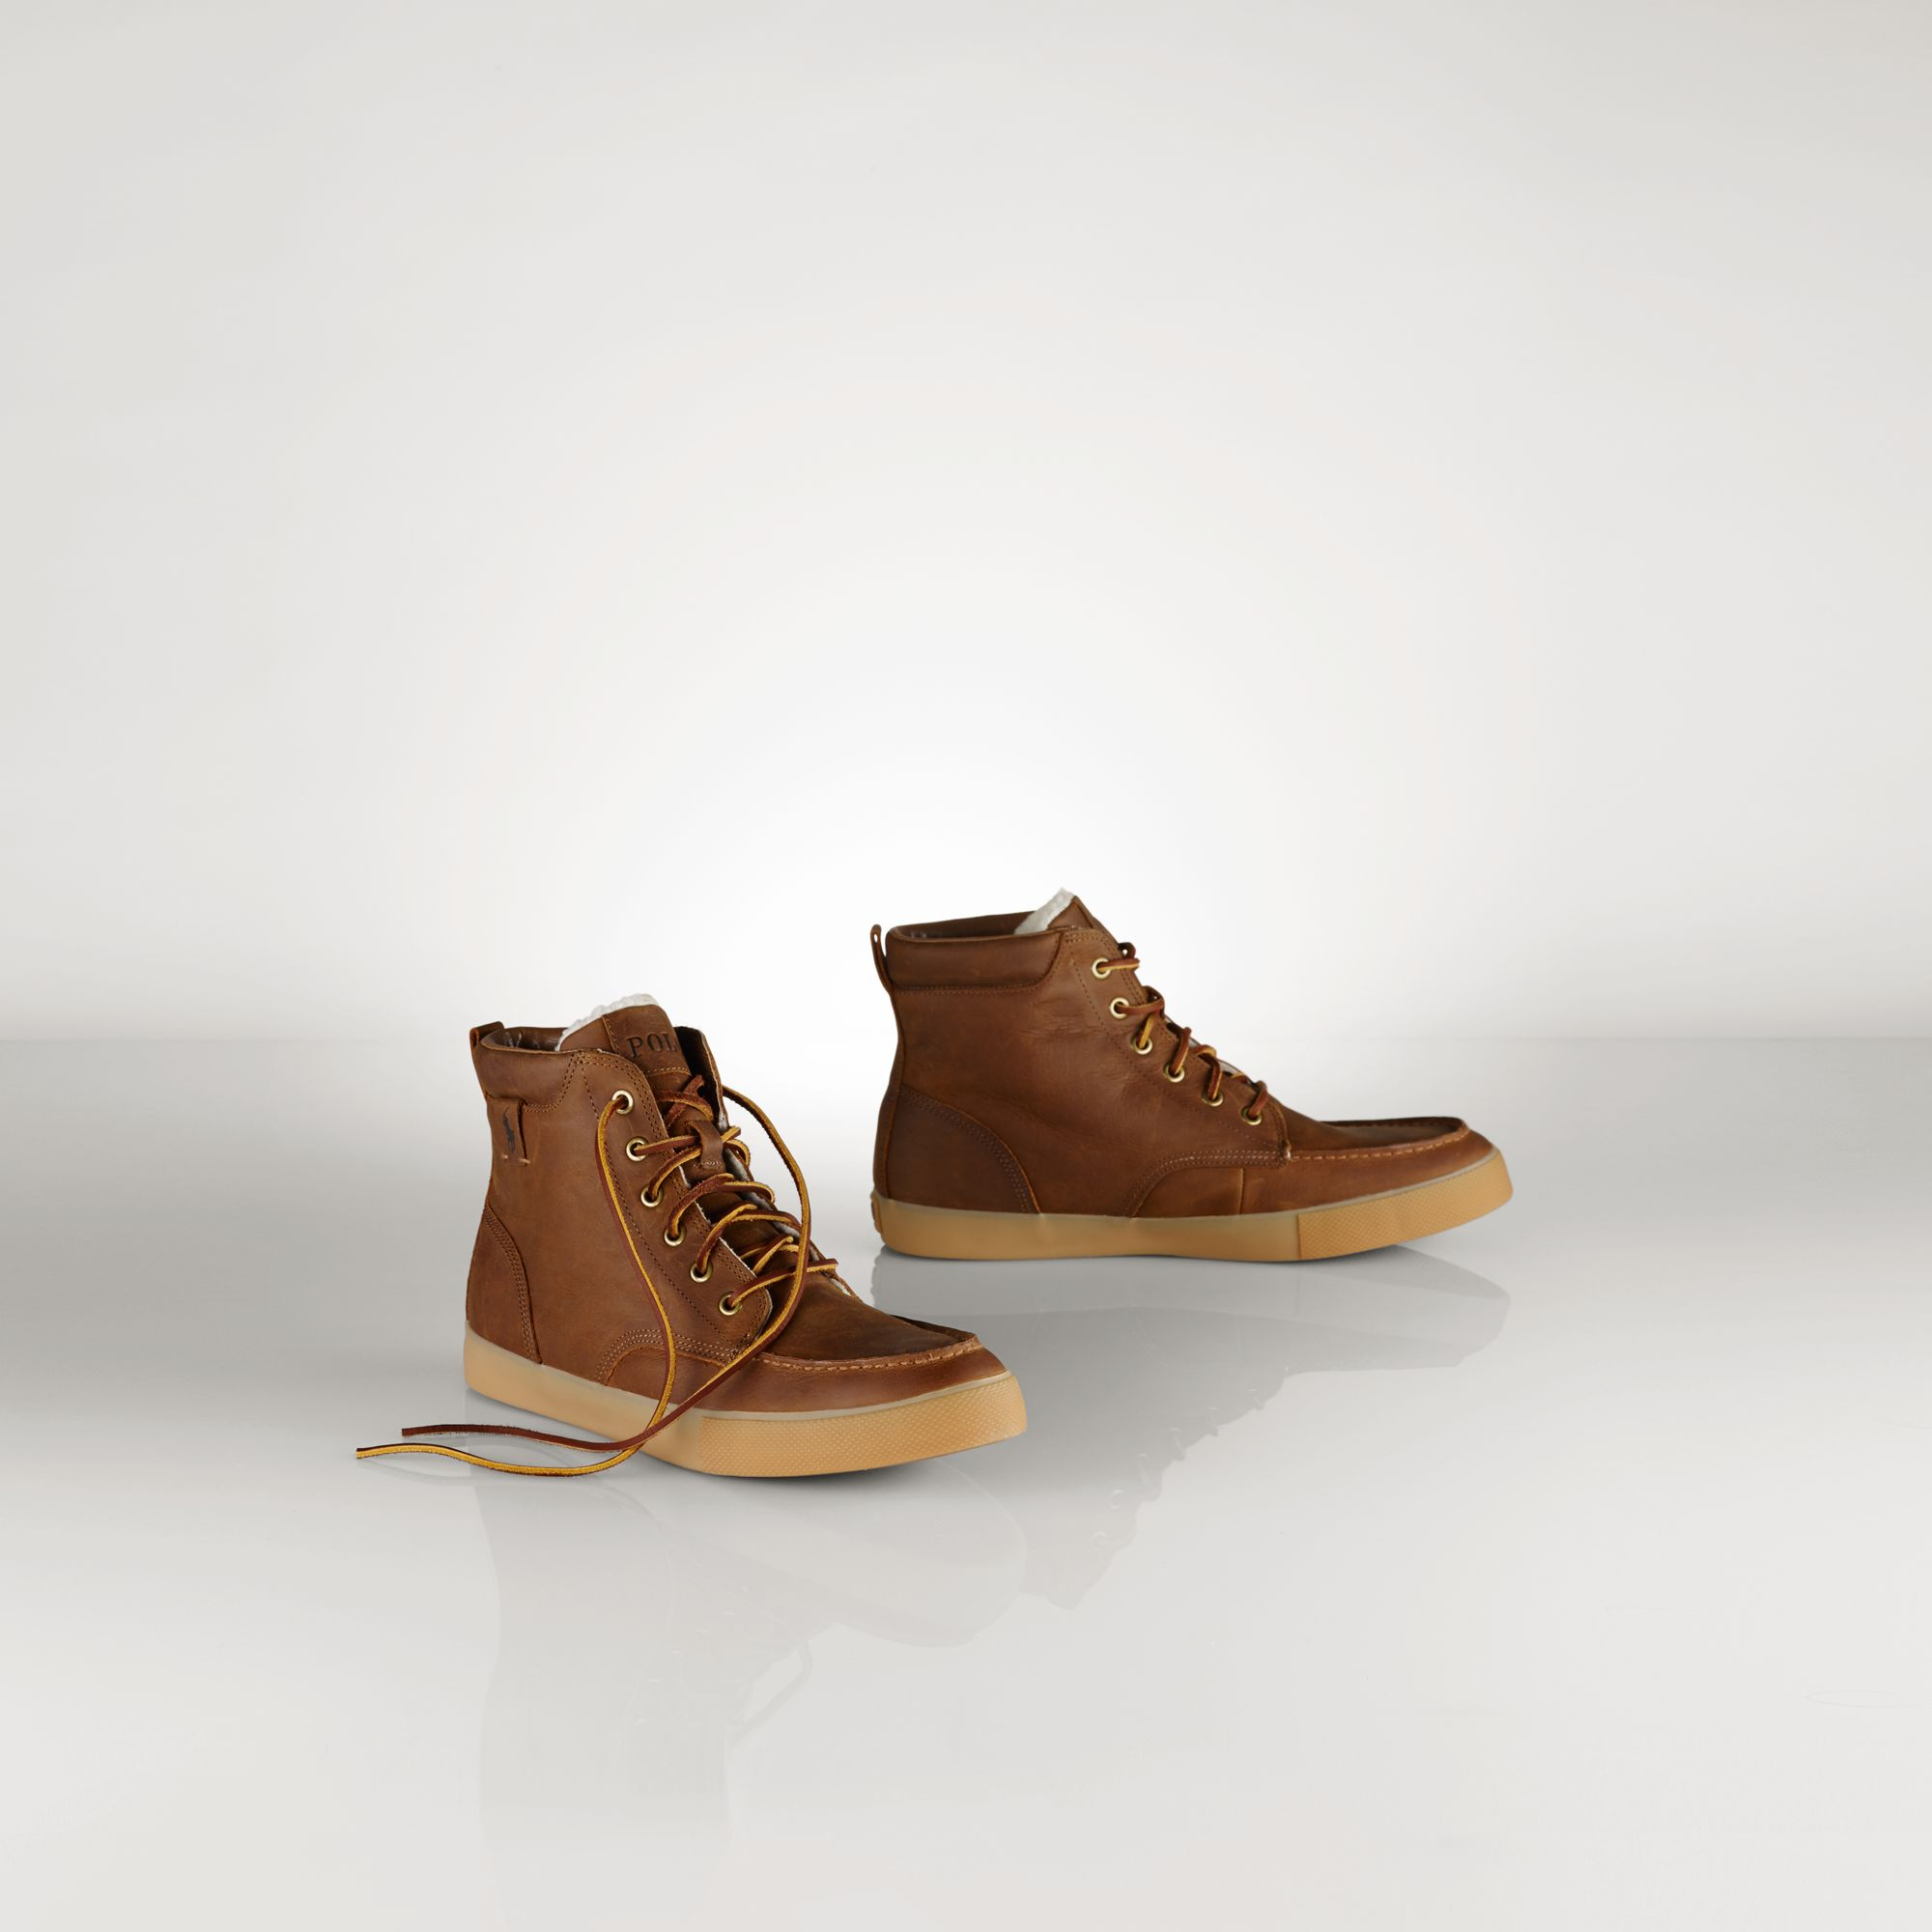 polo tedd leather sneaker boots